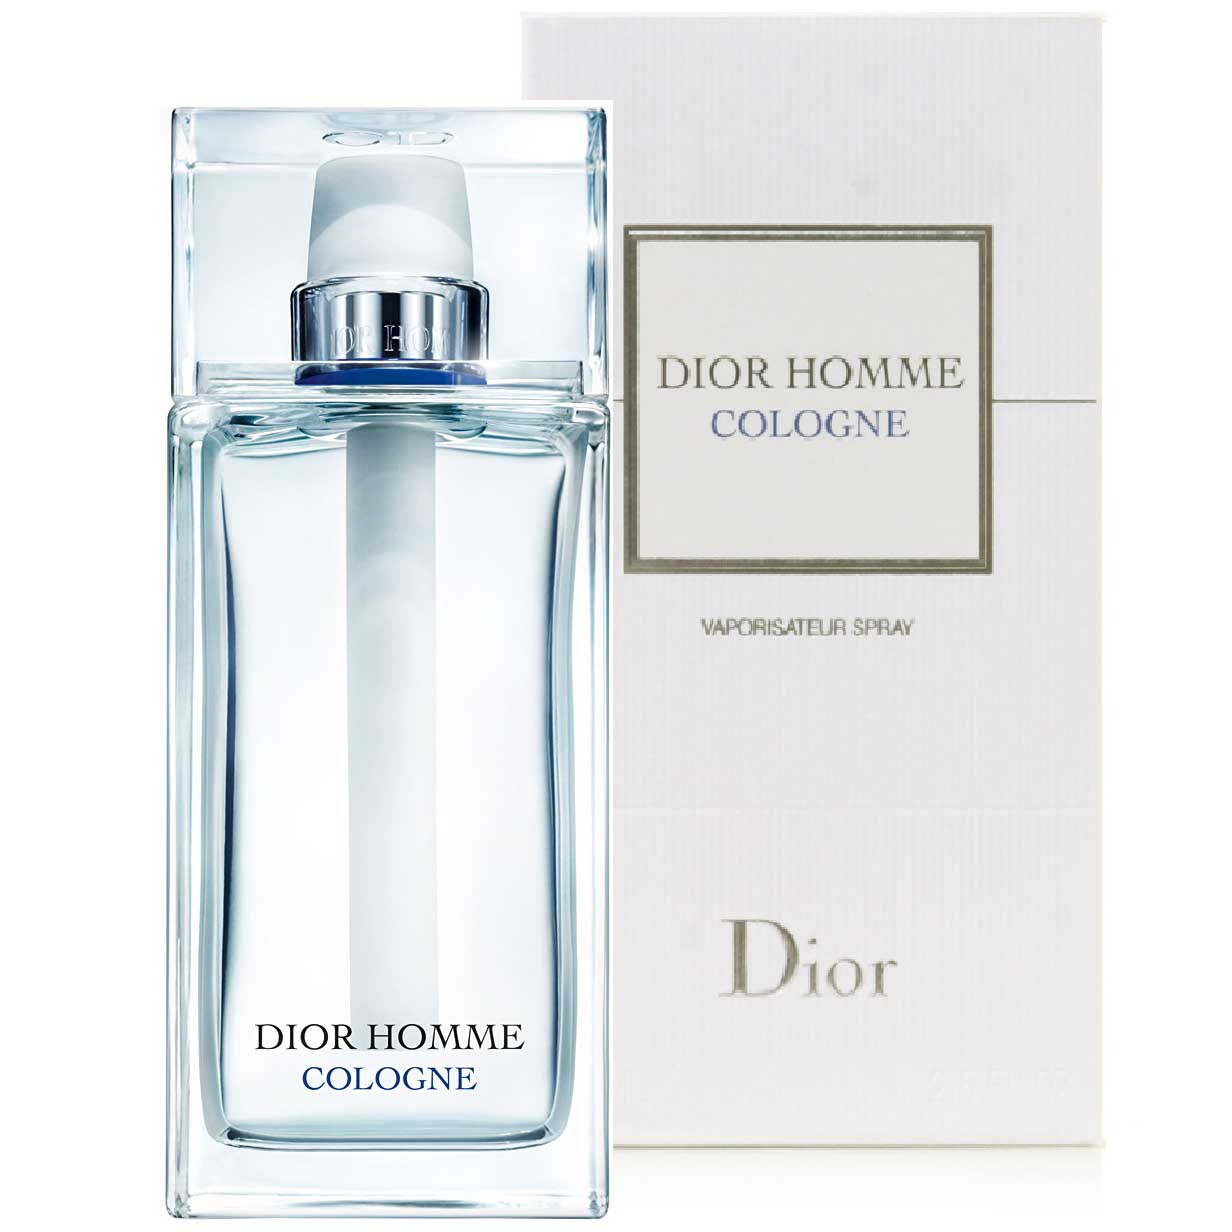 Dior Homme Cologne 2013 100ml